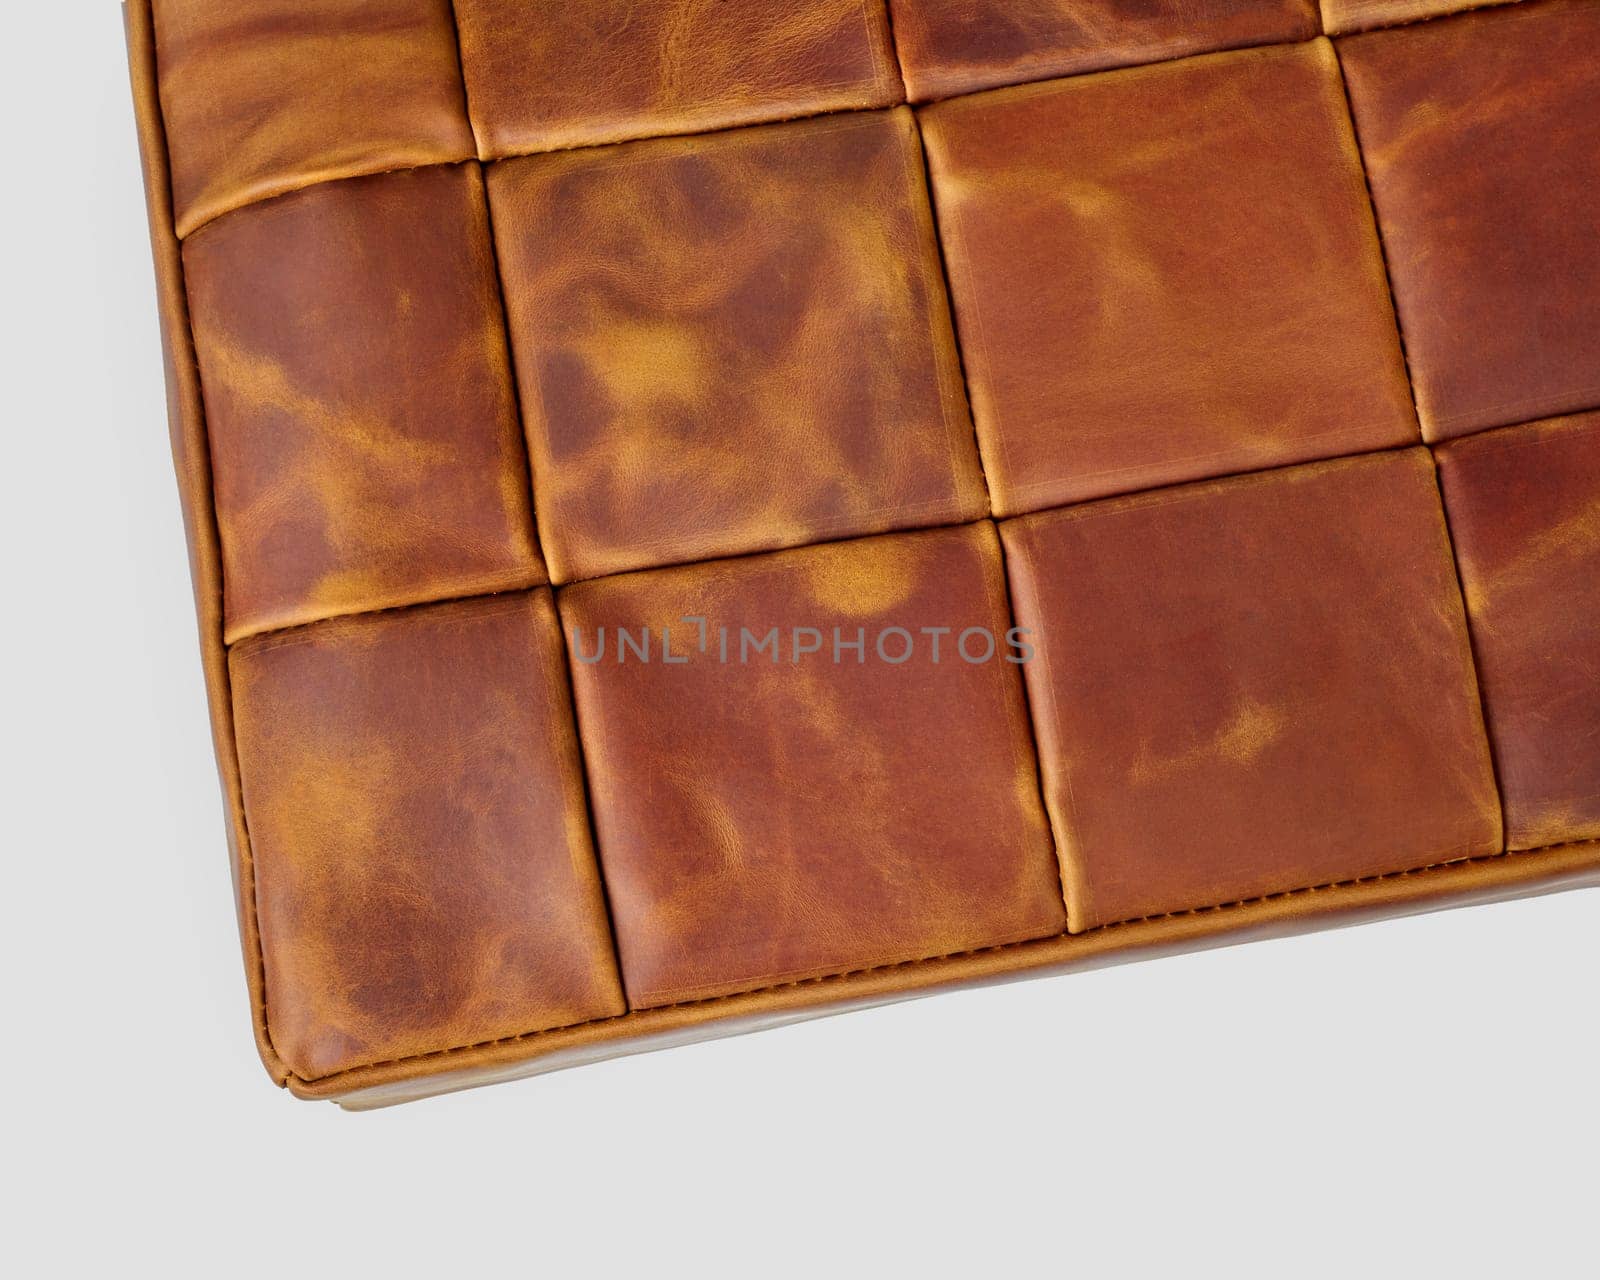 Closeup of soft meditation cushion for knee and leg comfort made from brown genuine leather patches. Handmade accessory for interior design